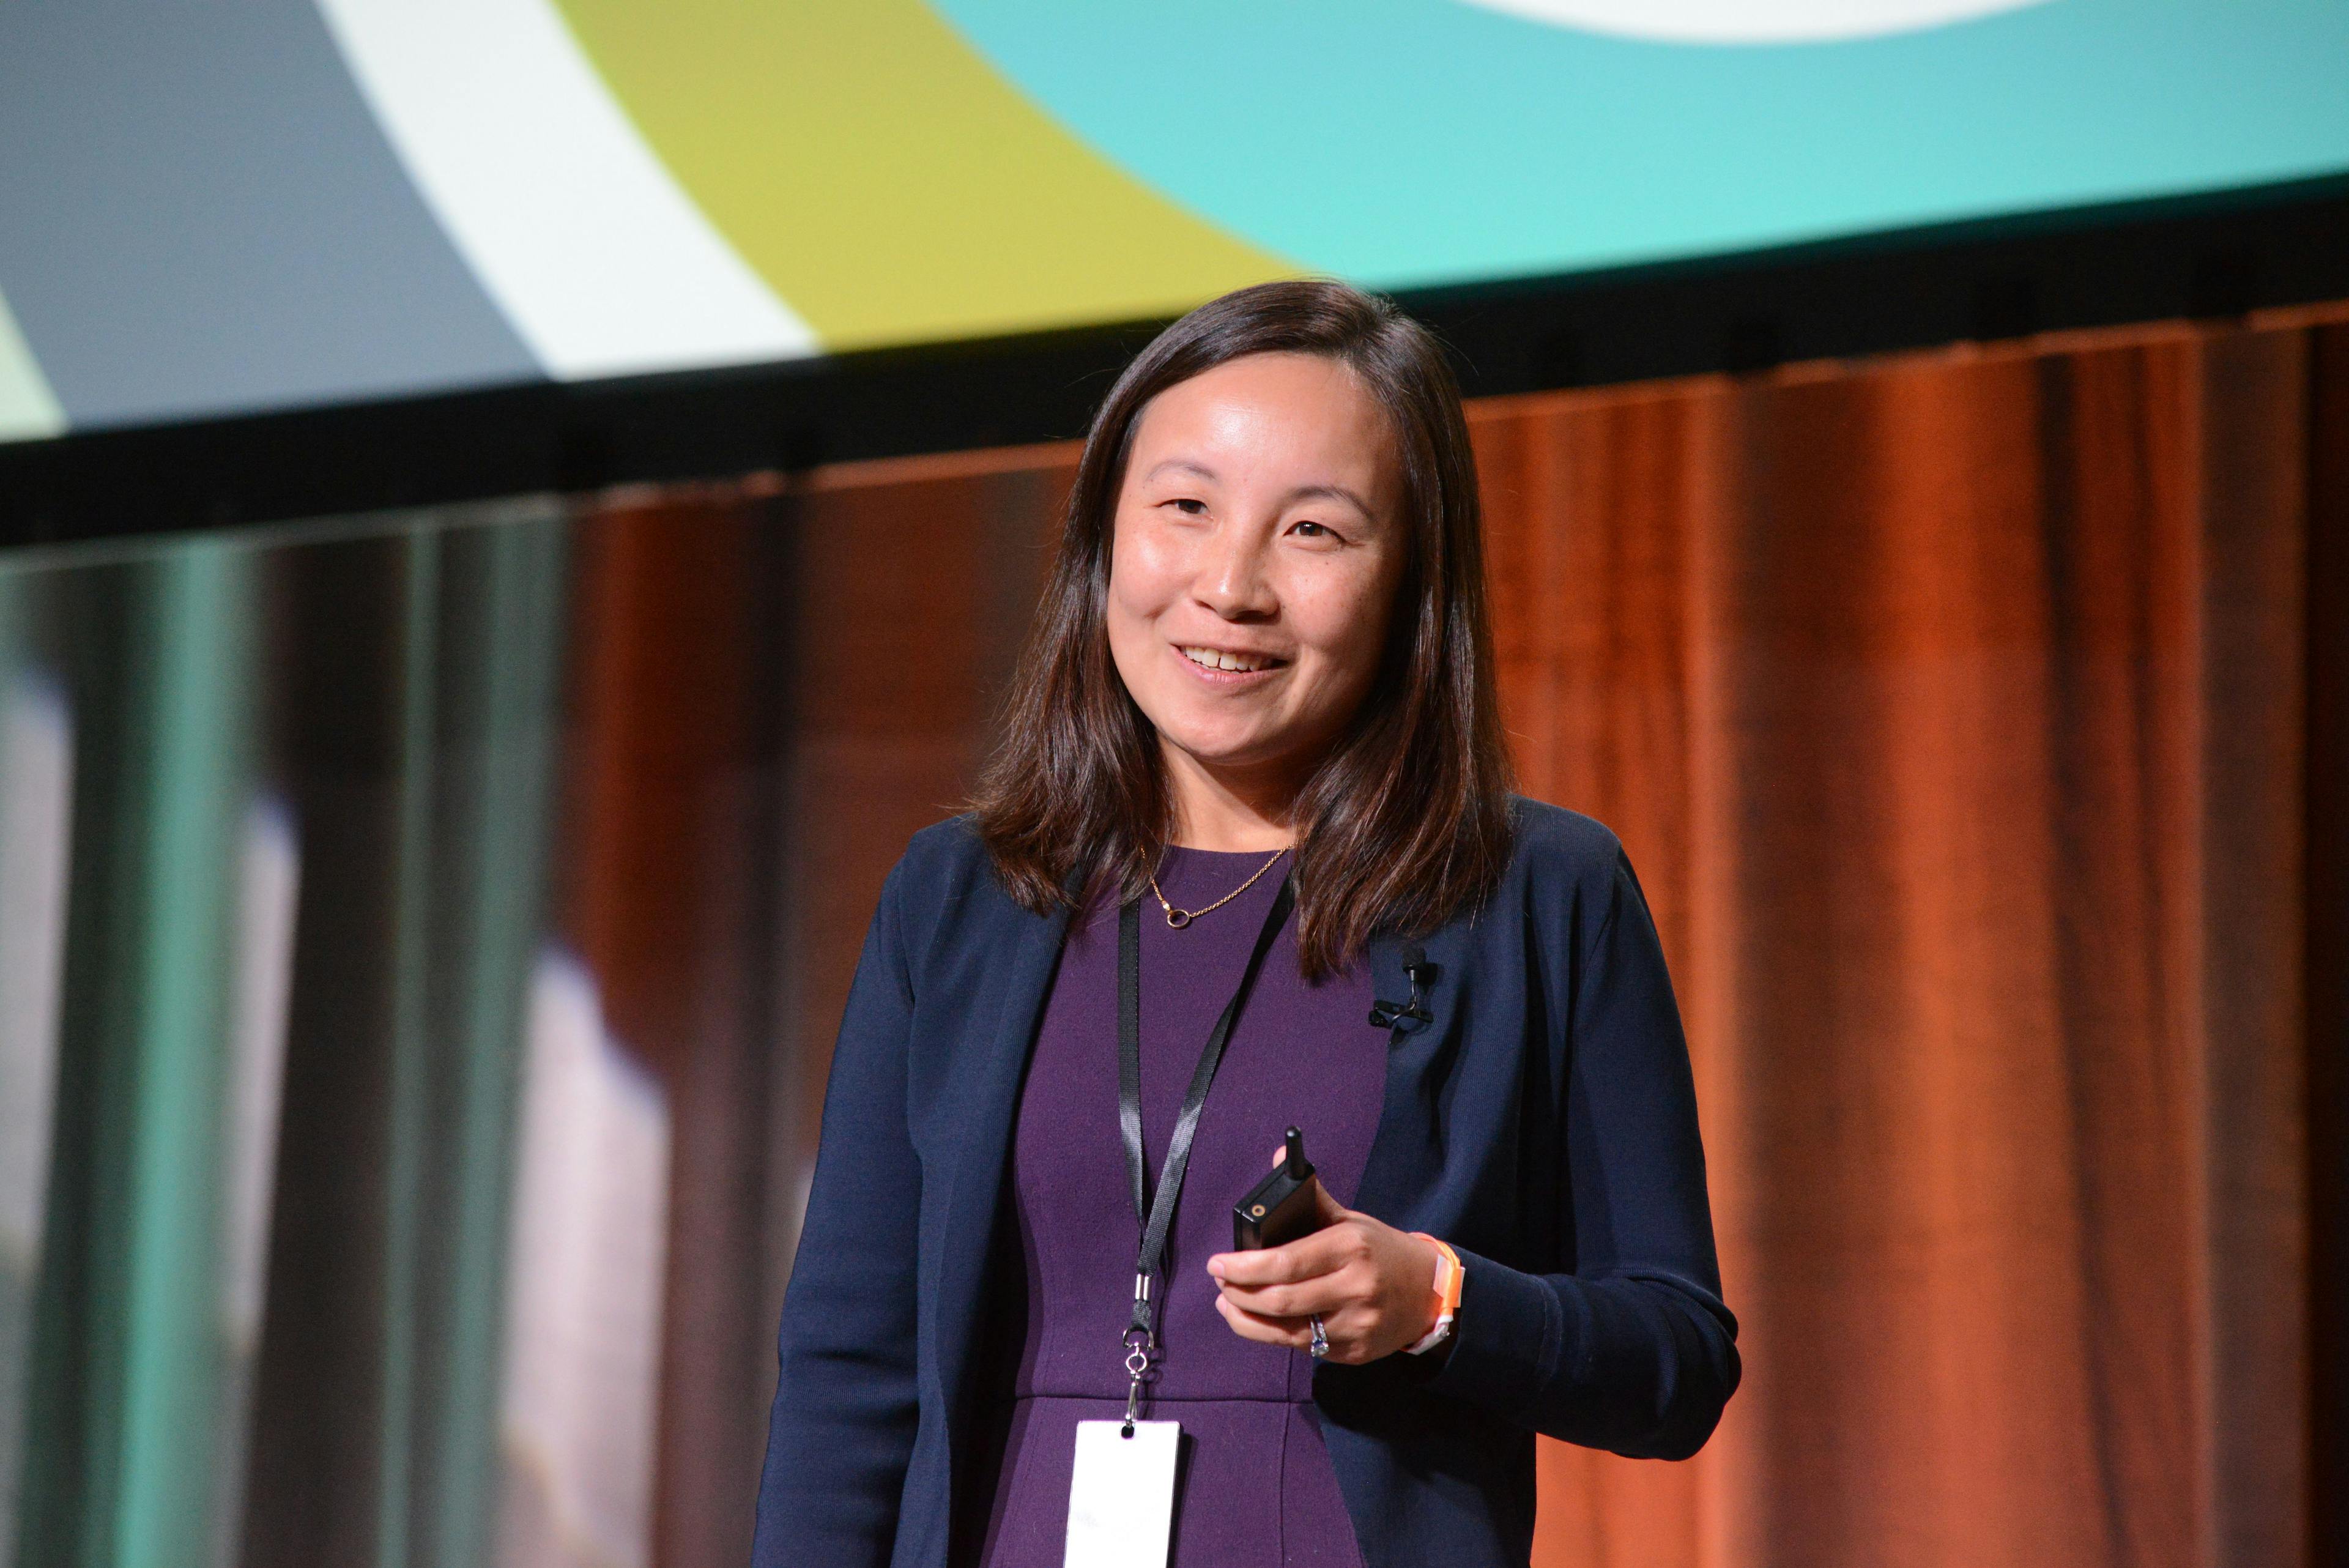 Lissy Hu, founder and CEO of CarePort powered by WellSky